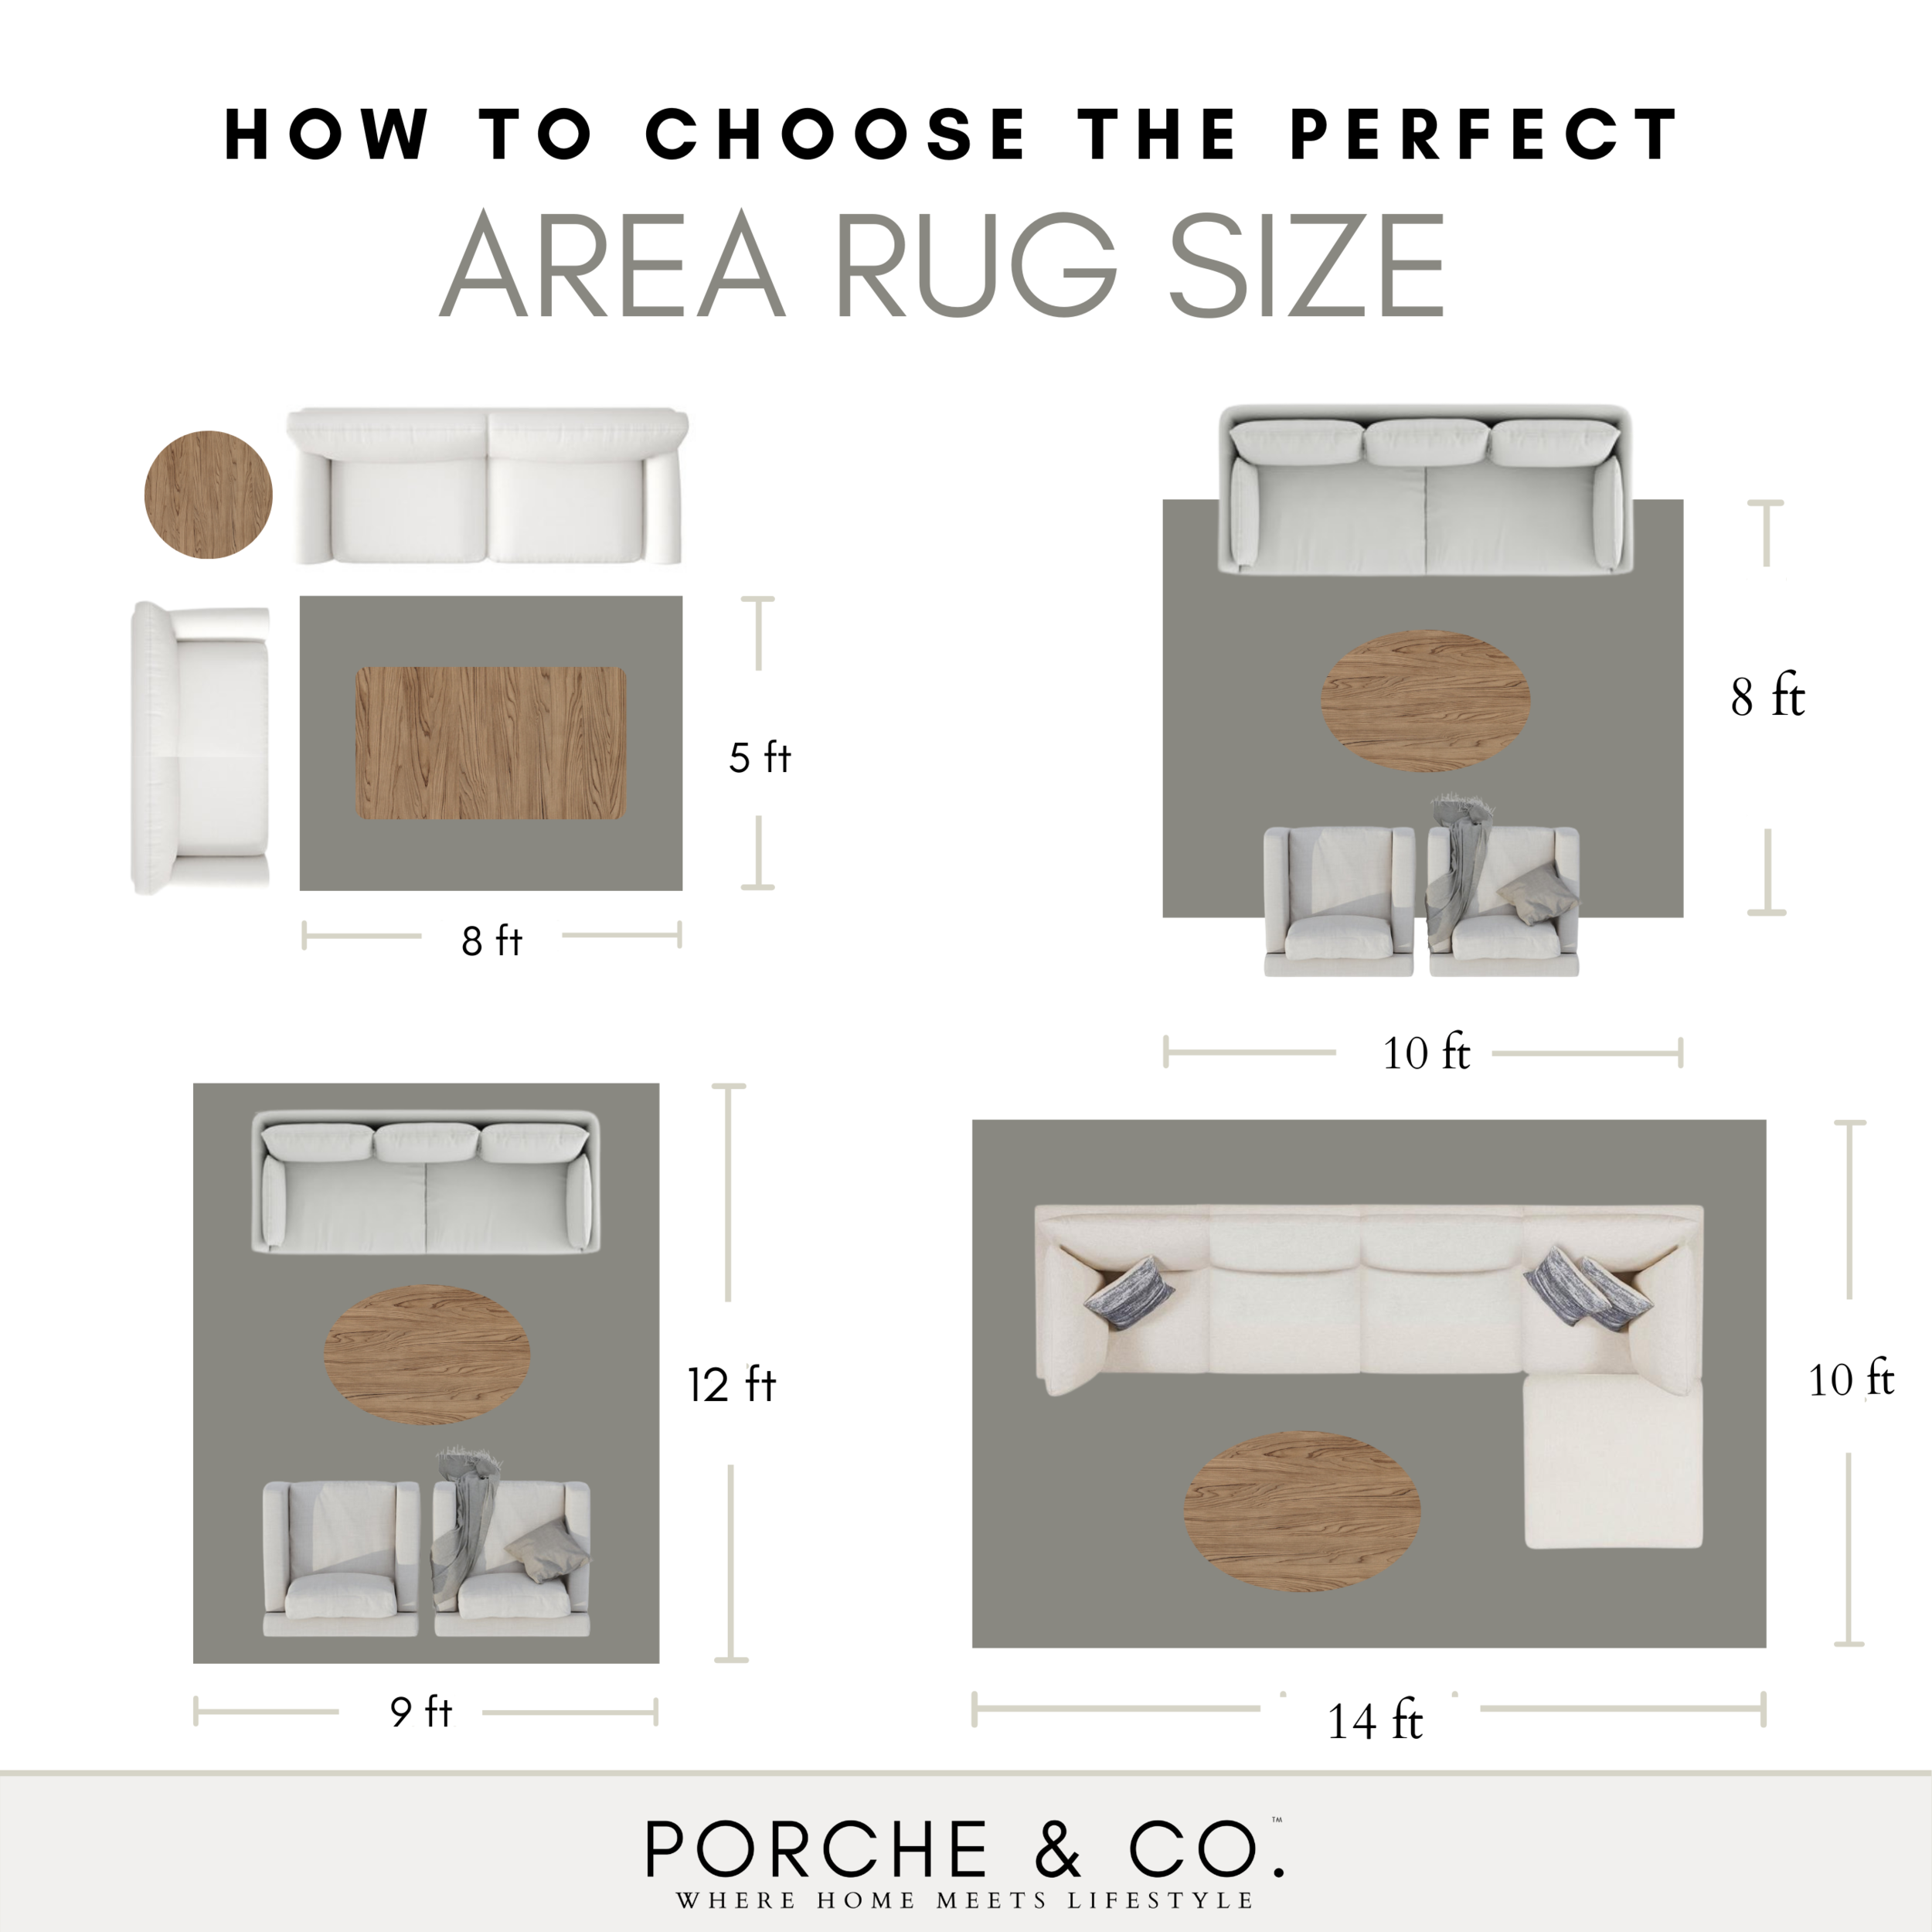 Rug Size Guide: Find the Perfect Rug Sizes for Every Room